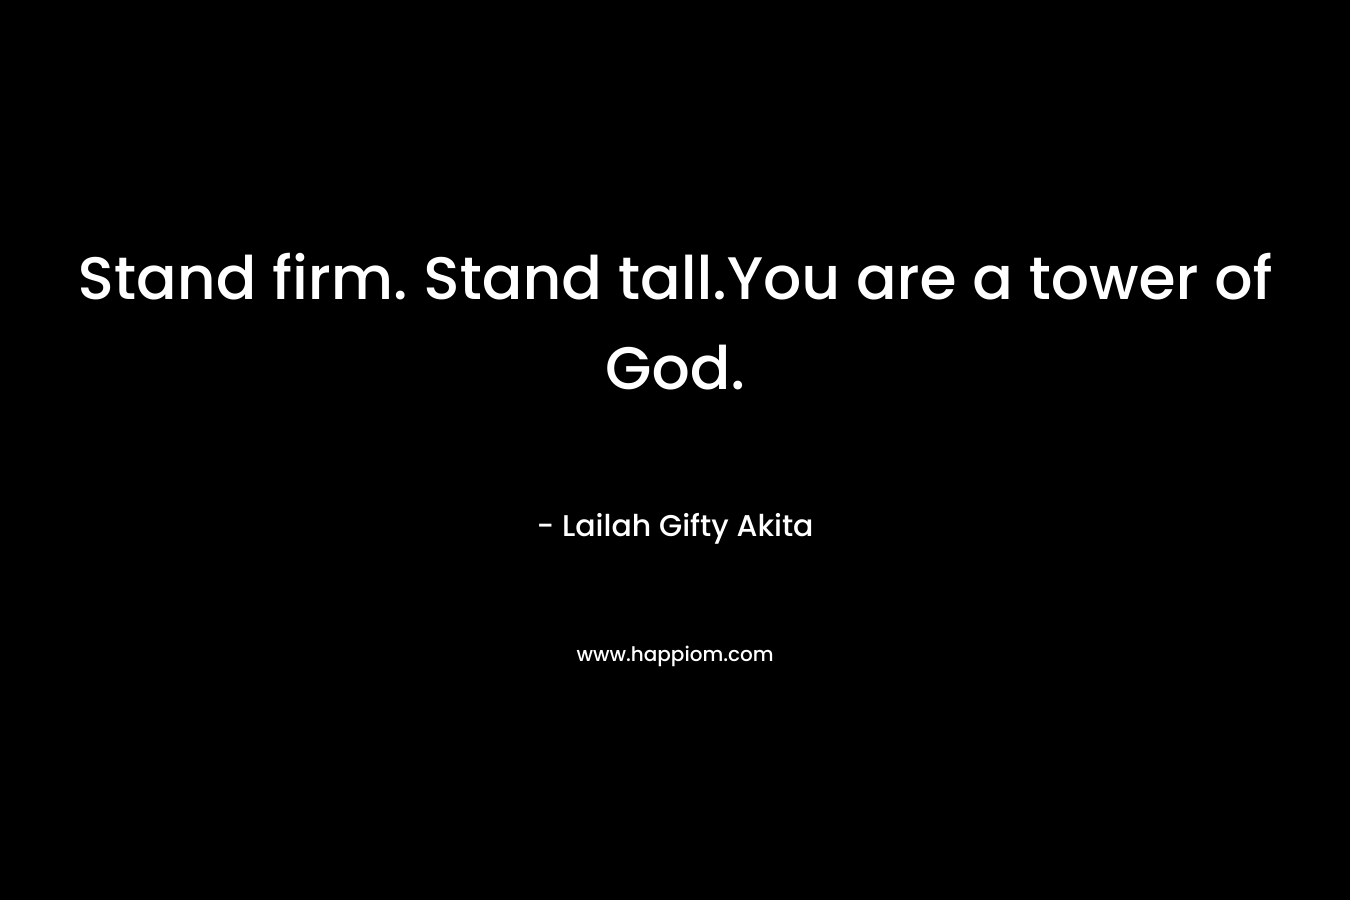 Stand firm. Stand tall.You are a tower of God.